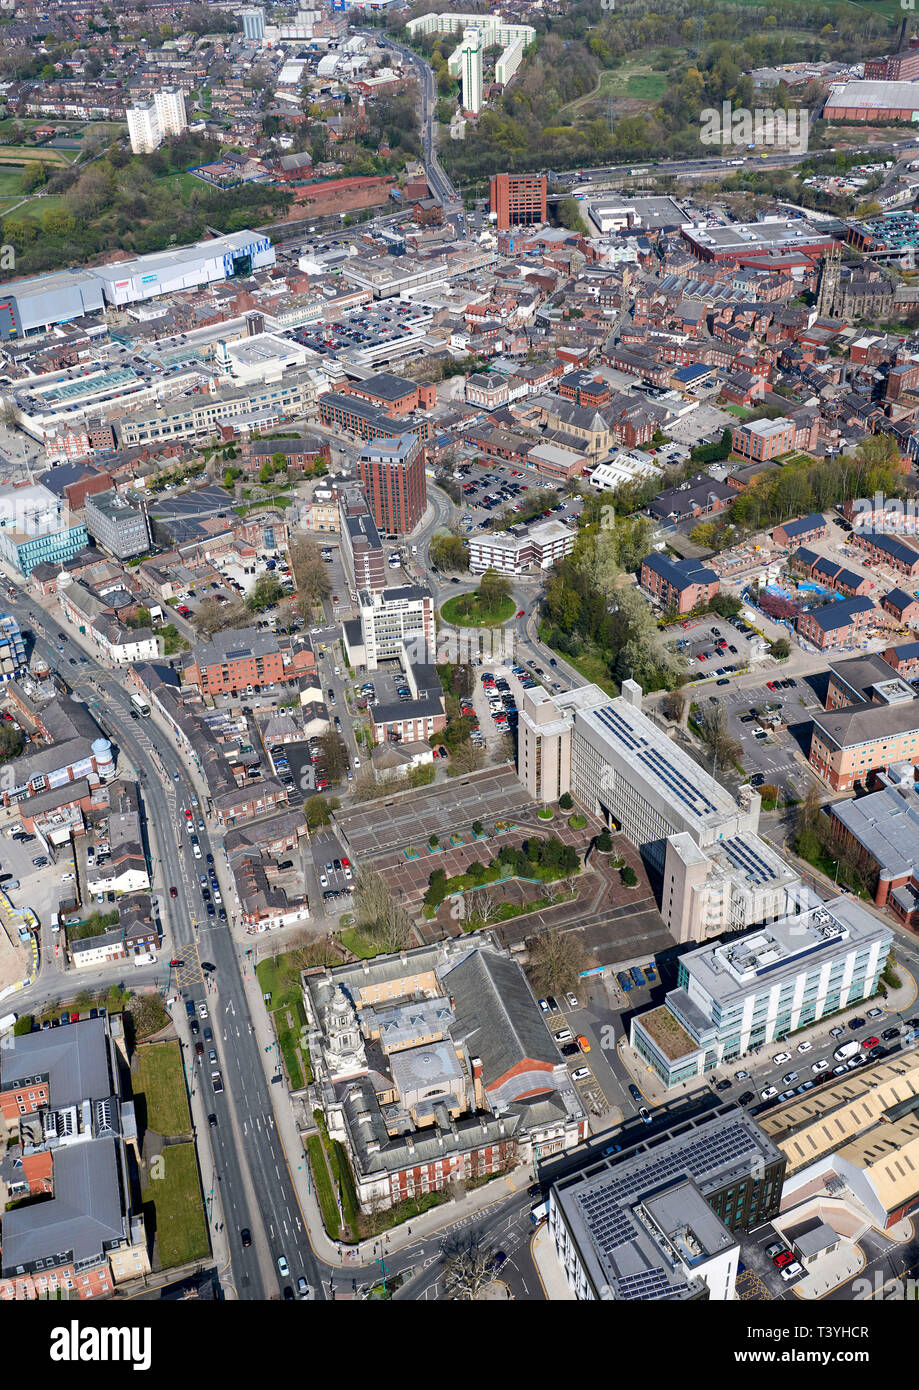 An aerial view of Stockport Civic area, the Town hall and Law Courts, North West England, UK Stock Photo